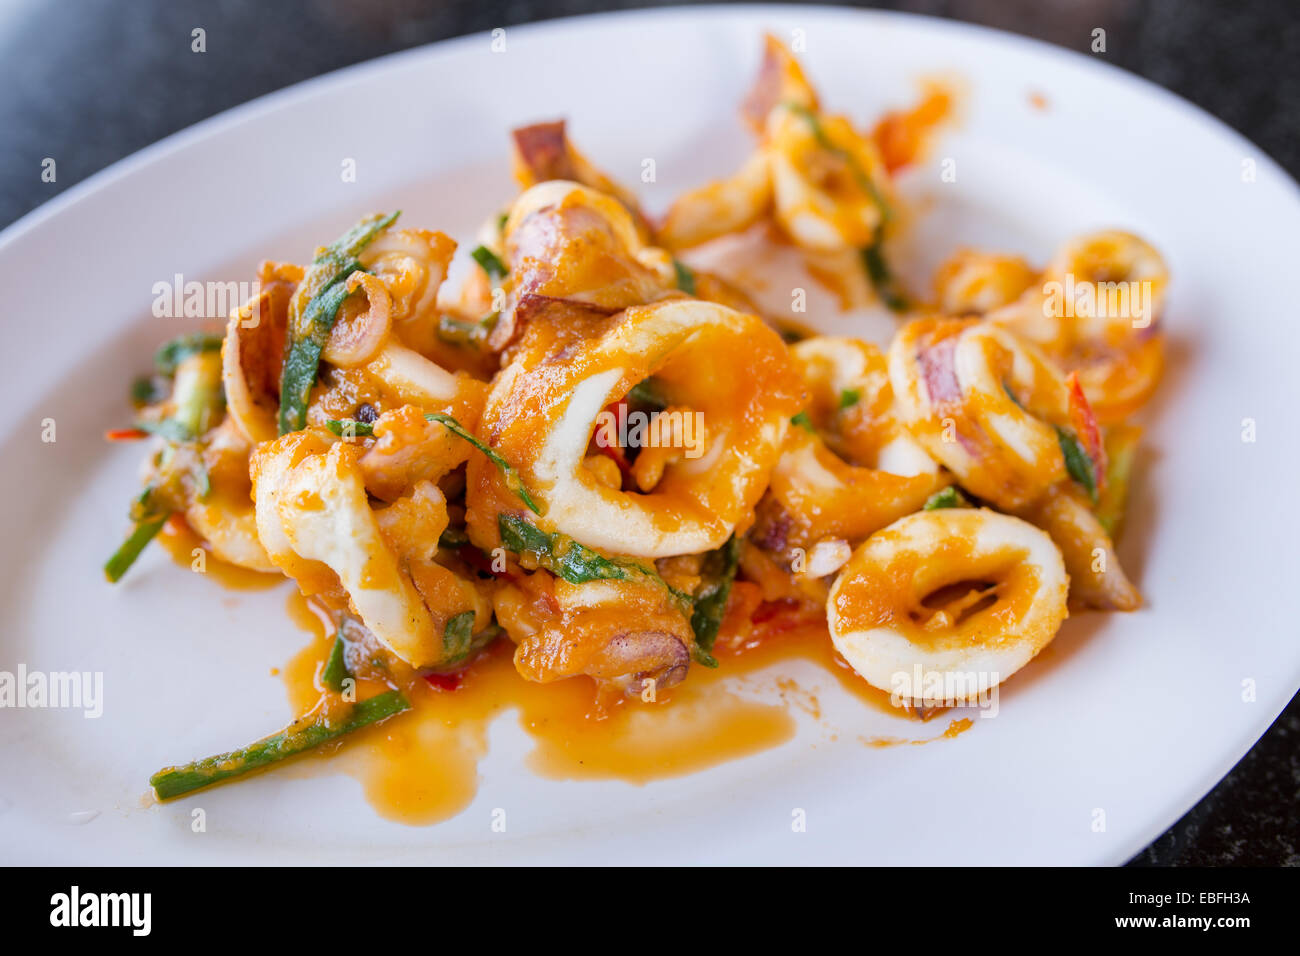 Stir fried squid with salted egg yolk Stock Photo